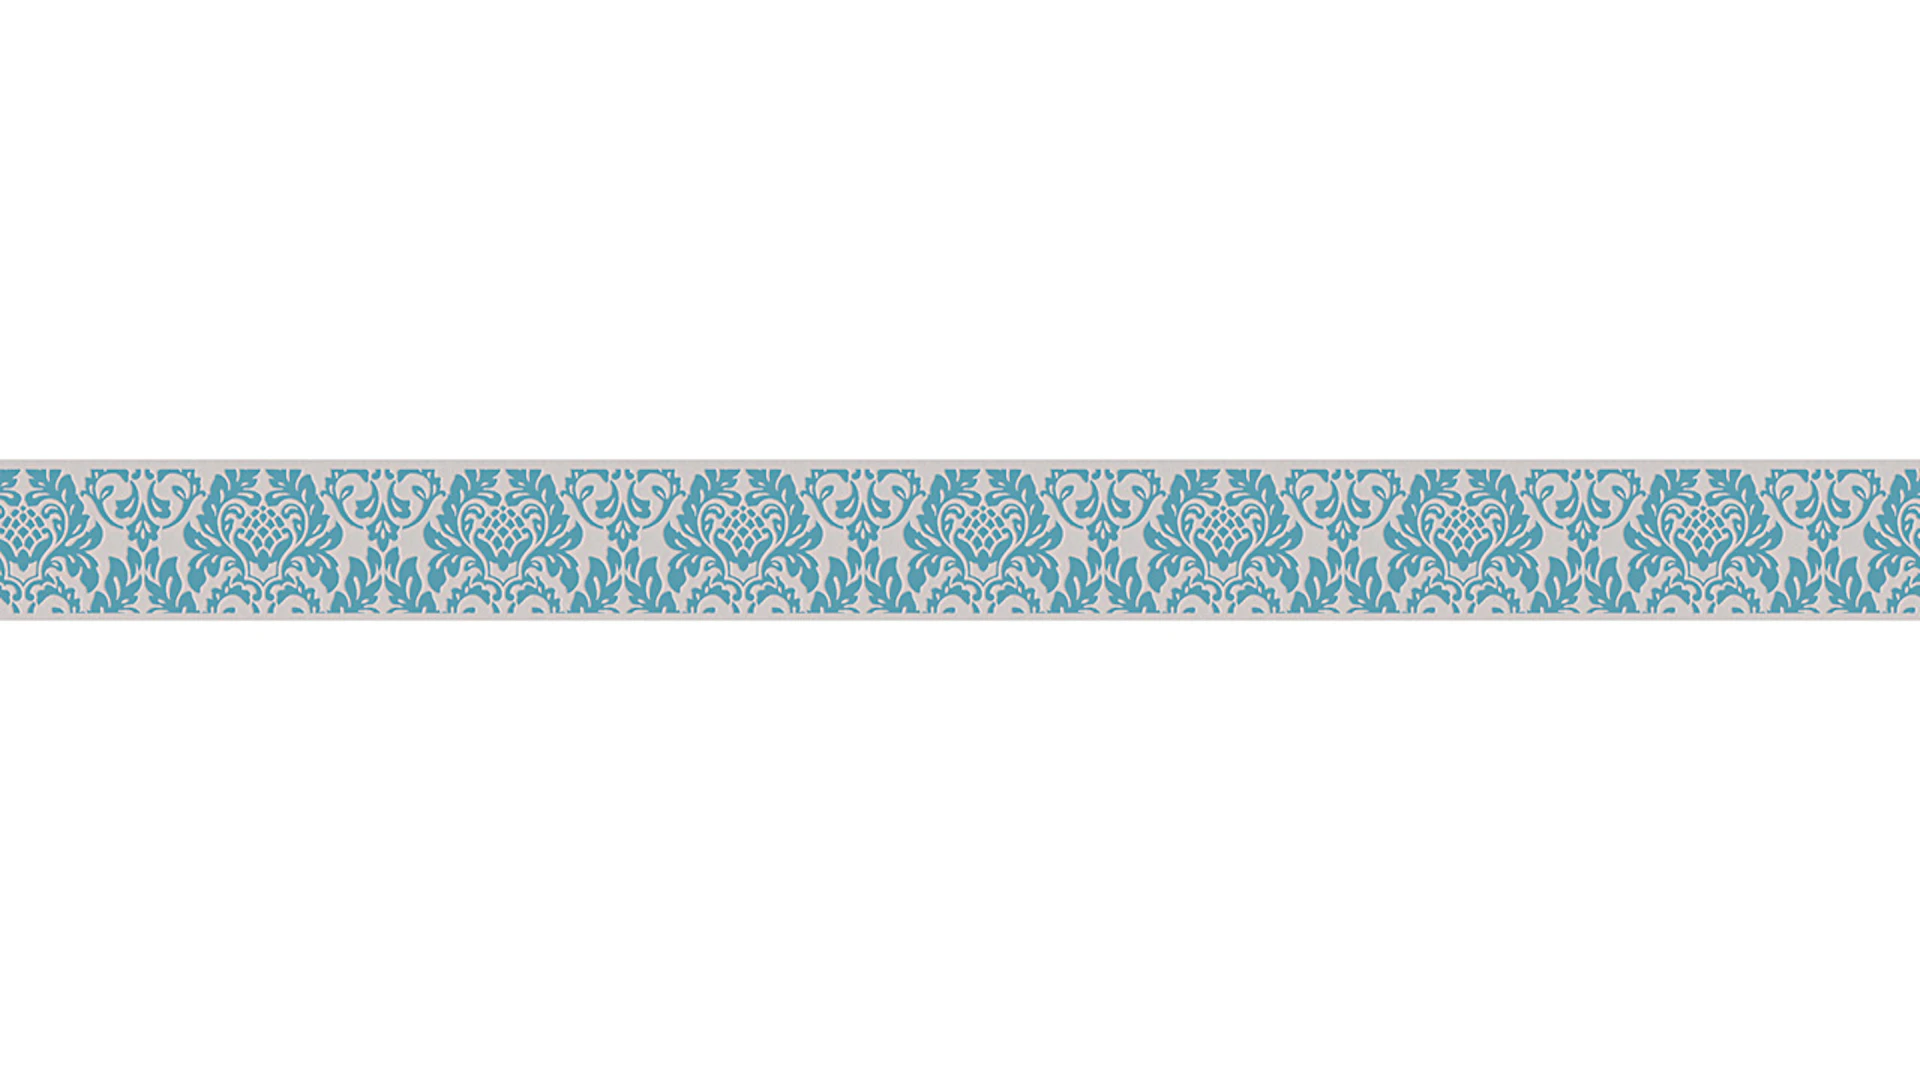 Vinyl wallpaper border blue retro country house ornaments Only Borders 10 891